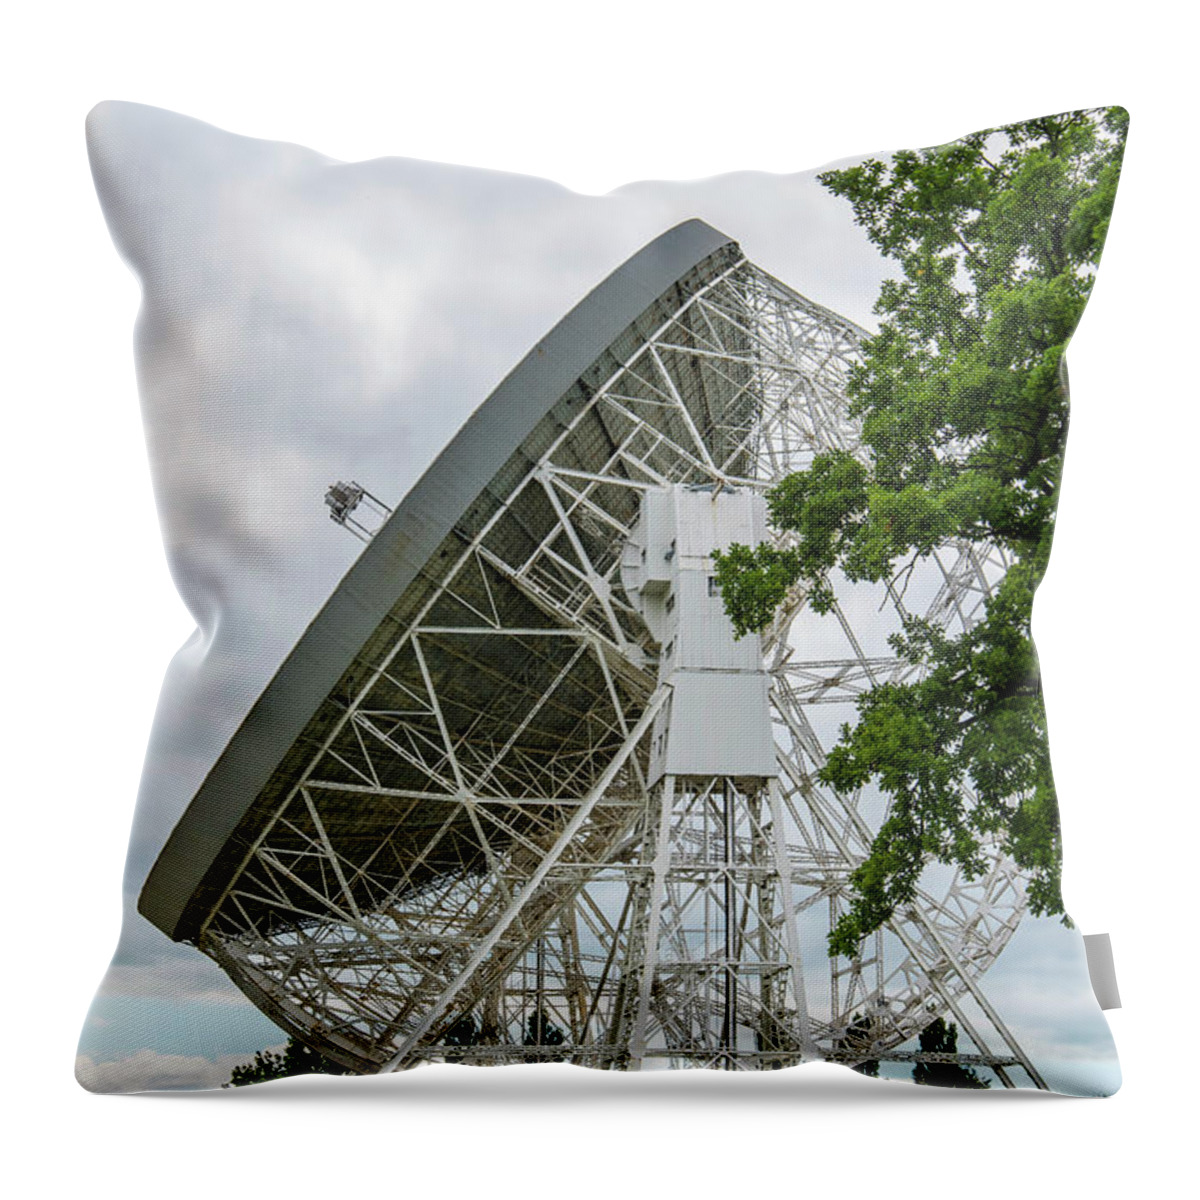 Searching The Heavens Throw Pillow featuring the photograph Searching the Heavens by Brenda Kean